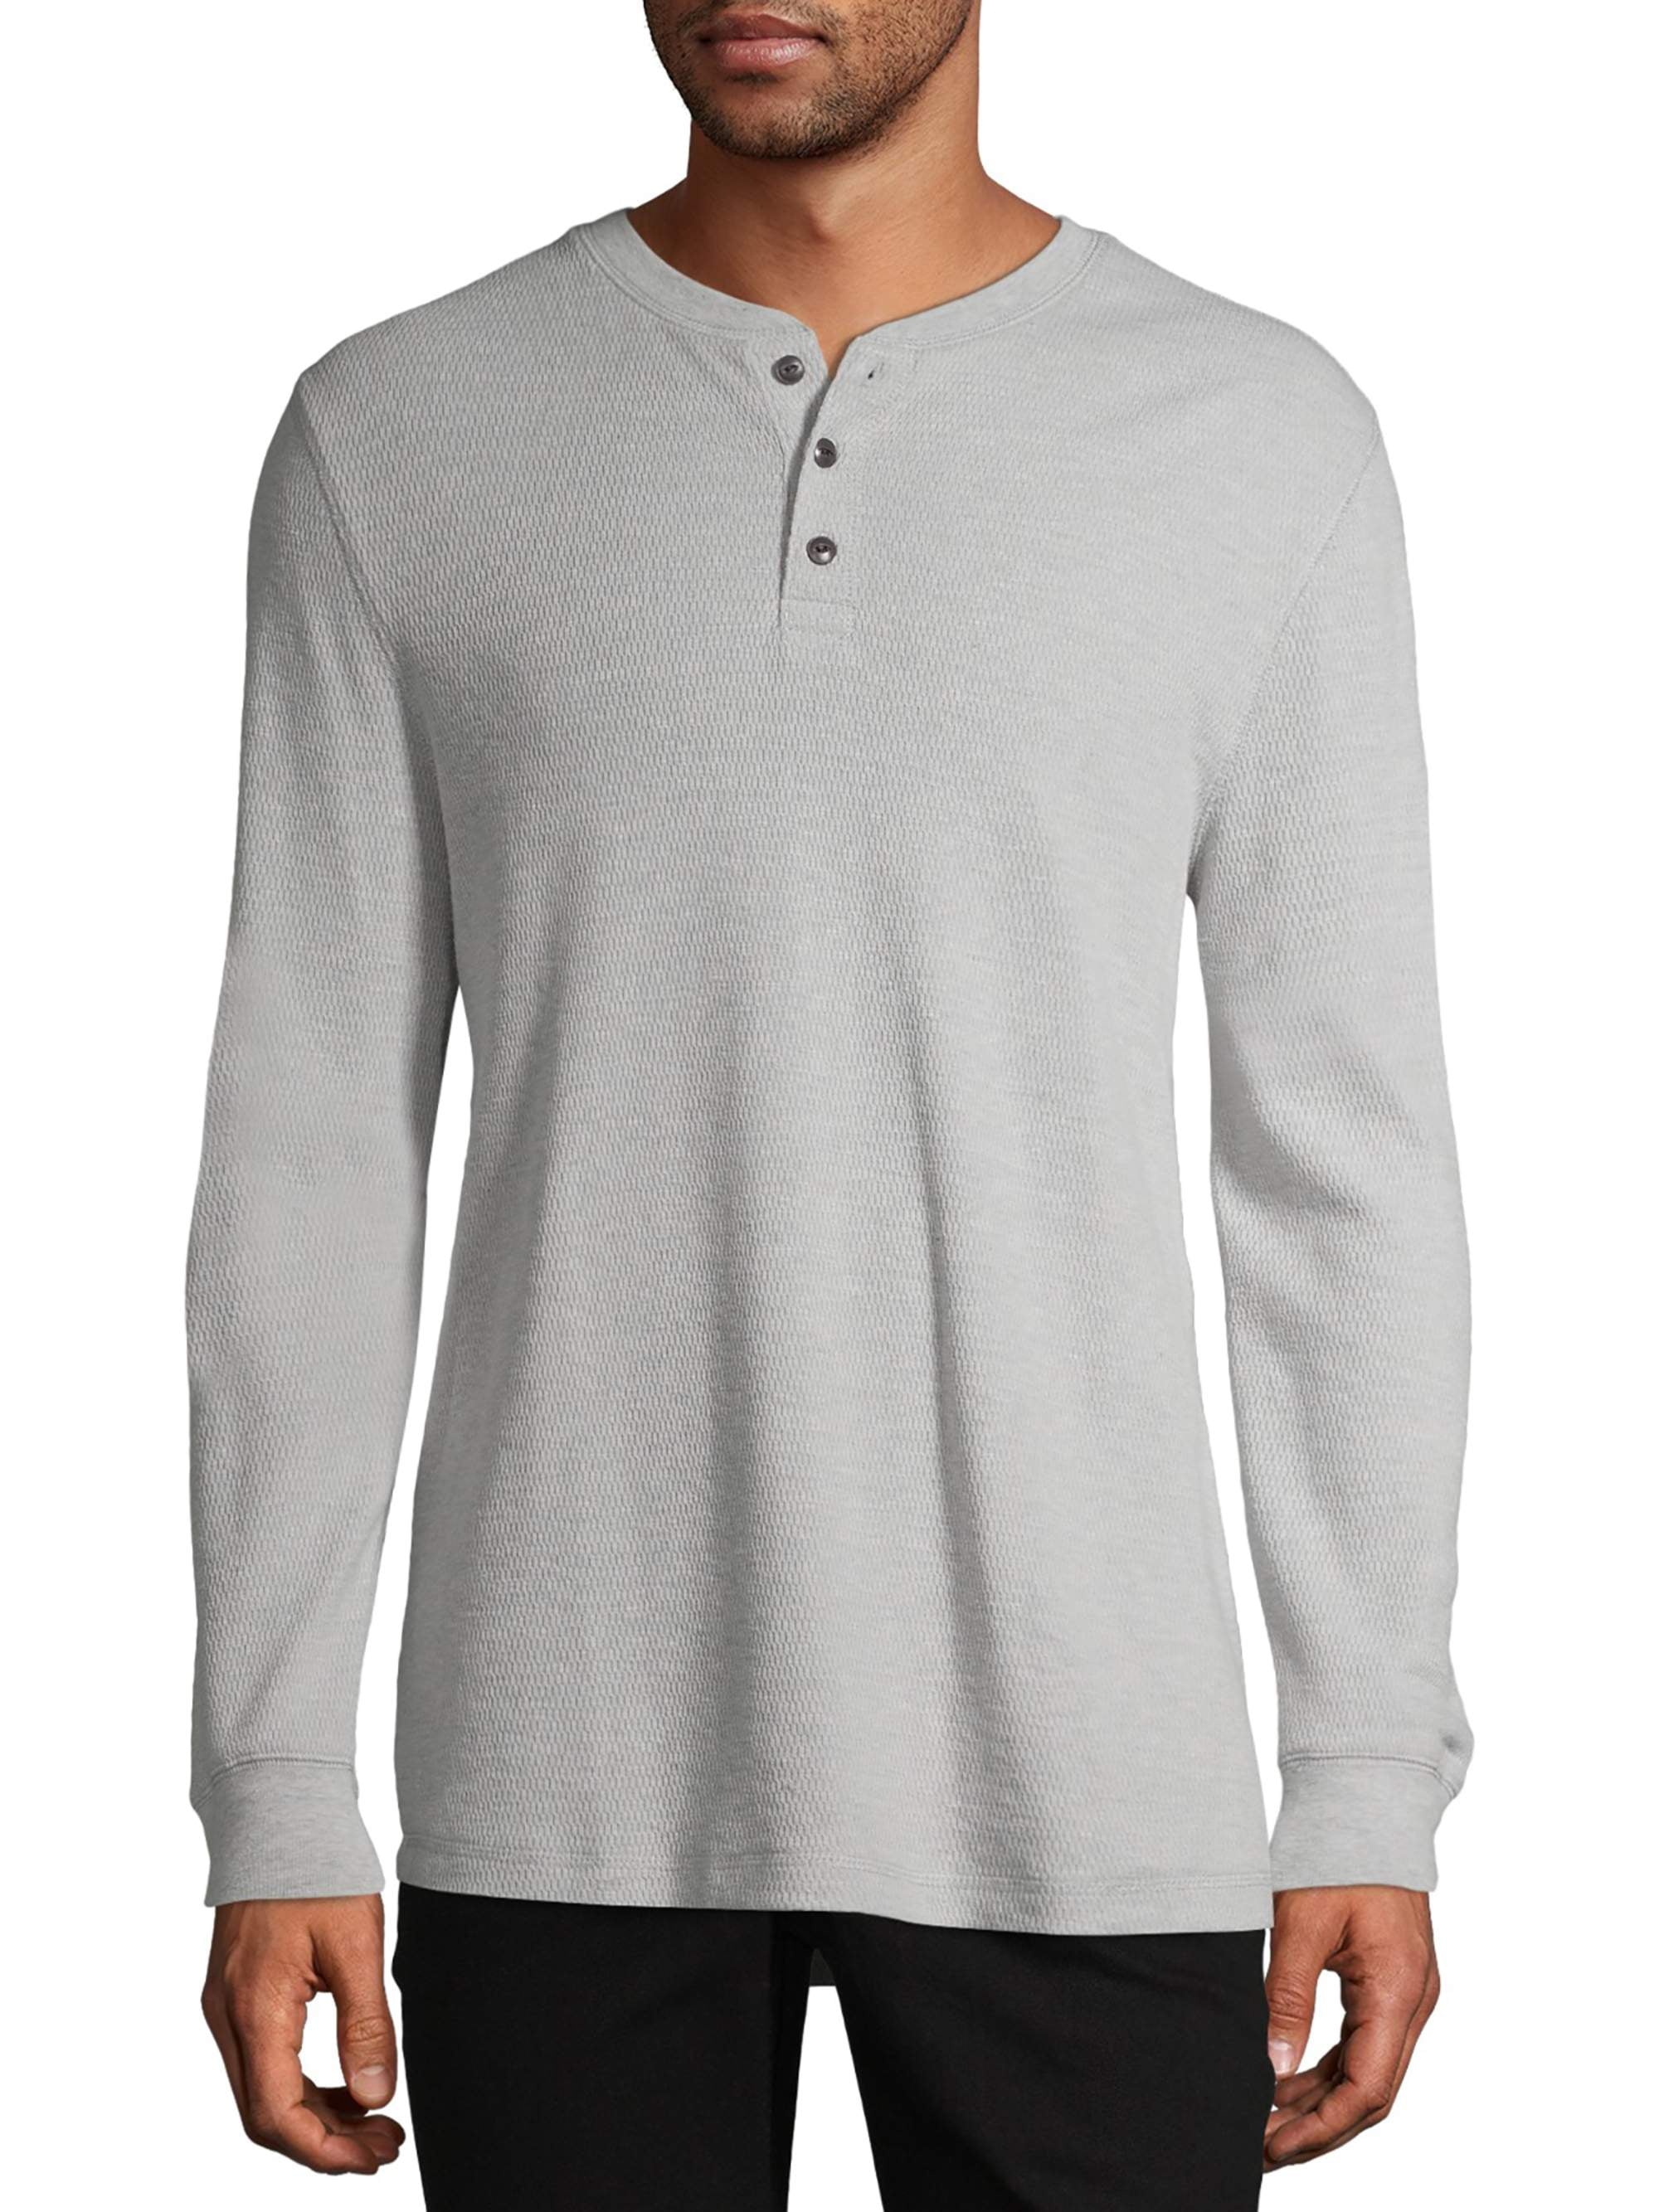 George Men's and Big Men's Long Sleeve Thermal Henley Shirt, Sizes